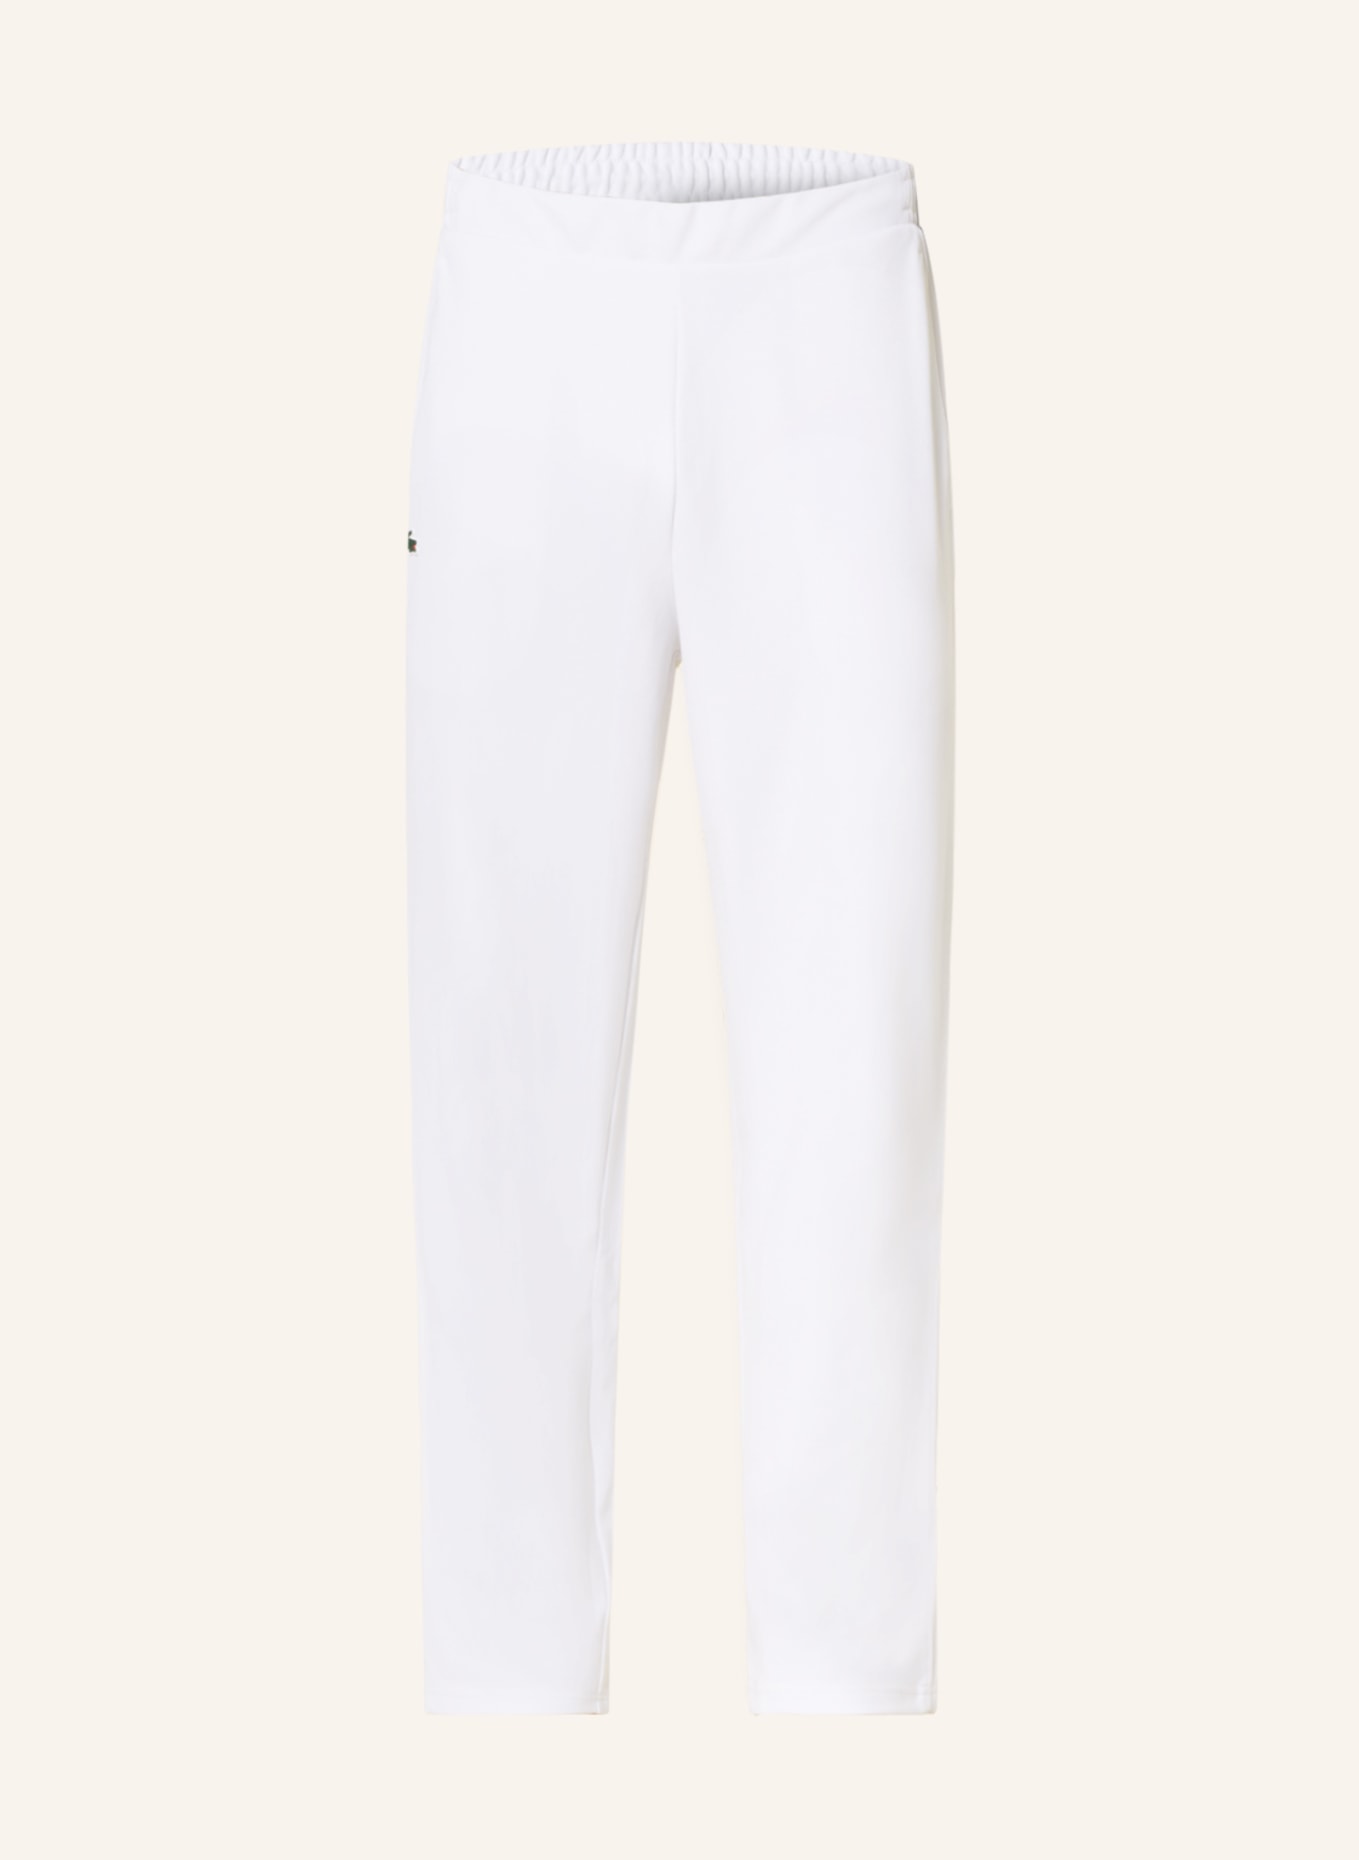 LACOSTE Track Pants, Farbe: WEISS (Bild 1)